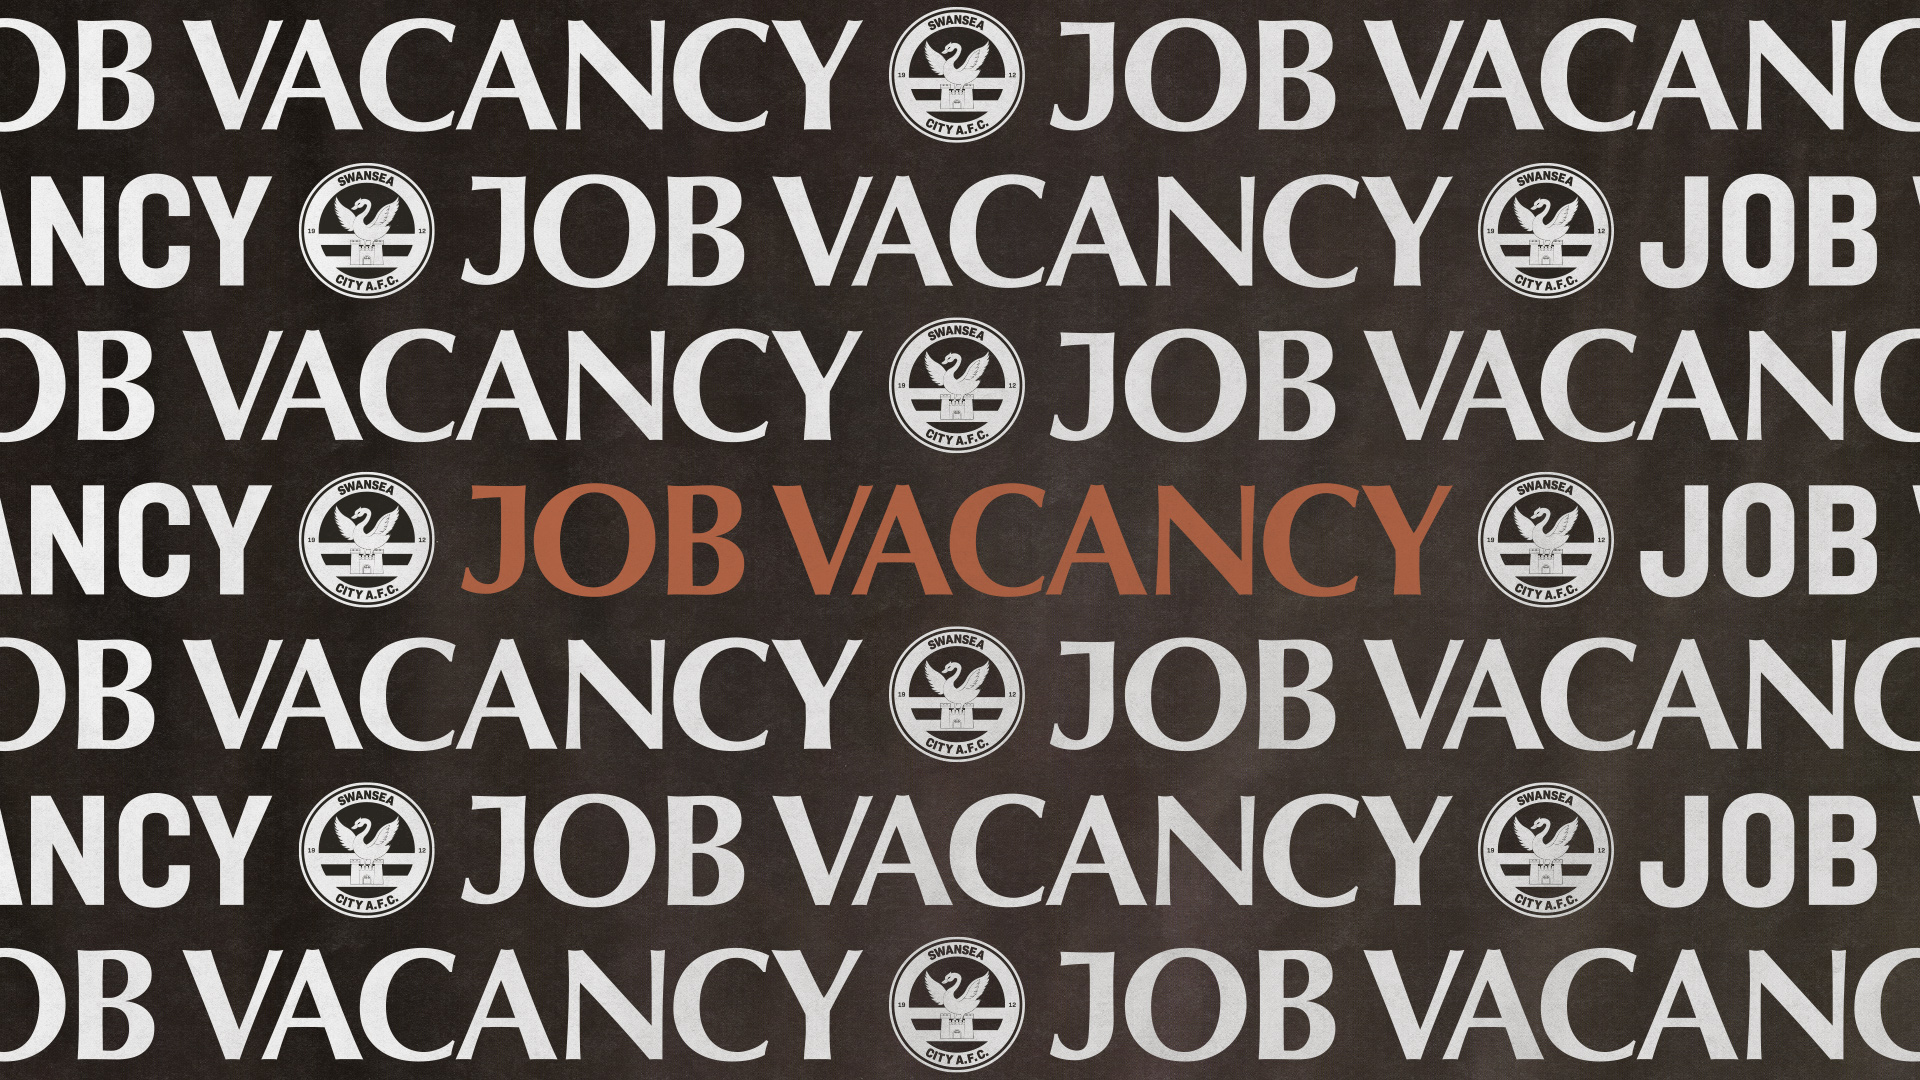 New Vacancies placeholder 2021-22